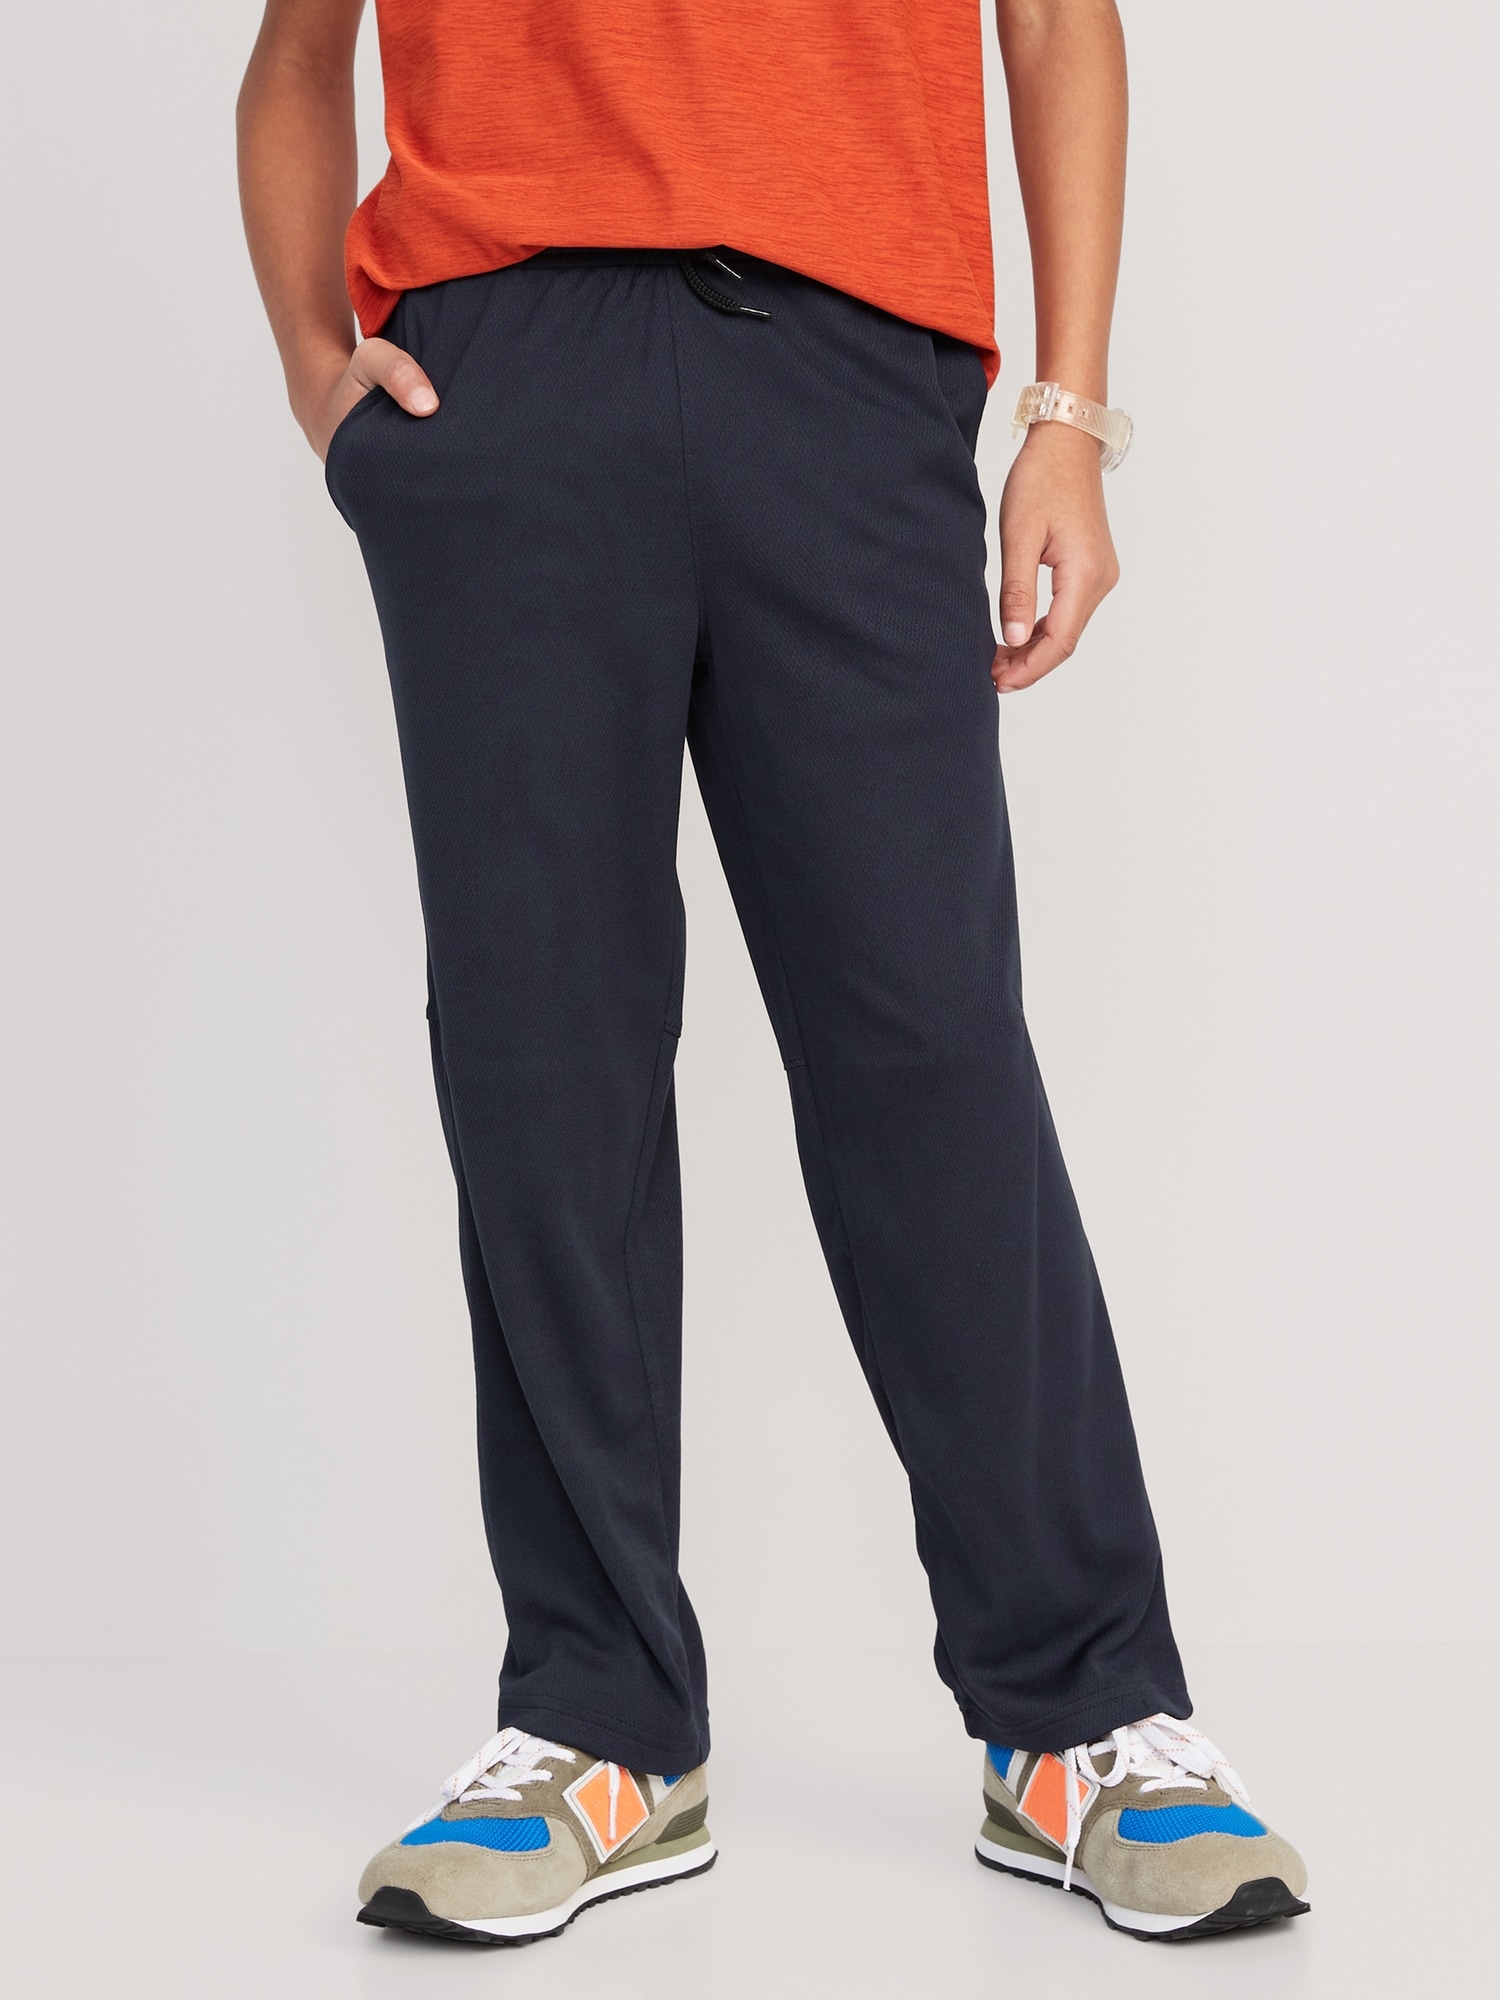 Go-Dry Cool Mesh Track Pants for Boys